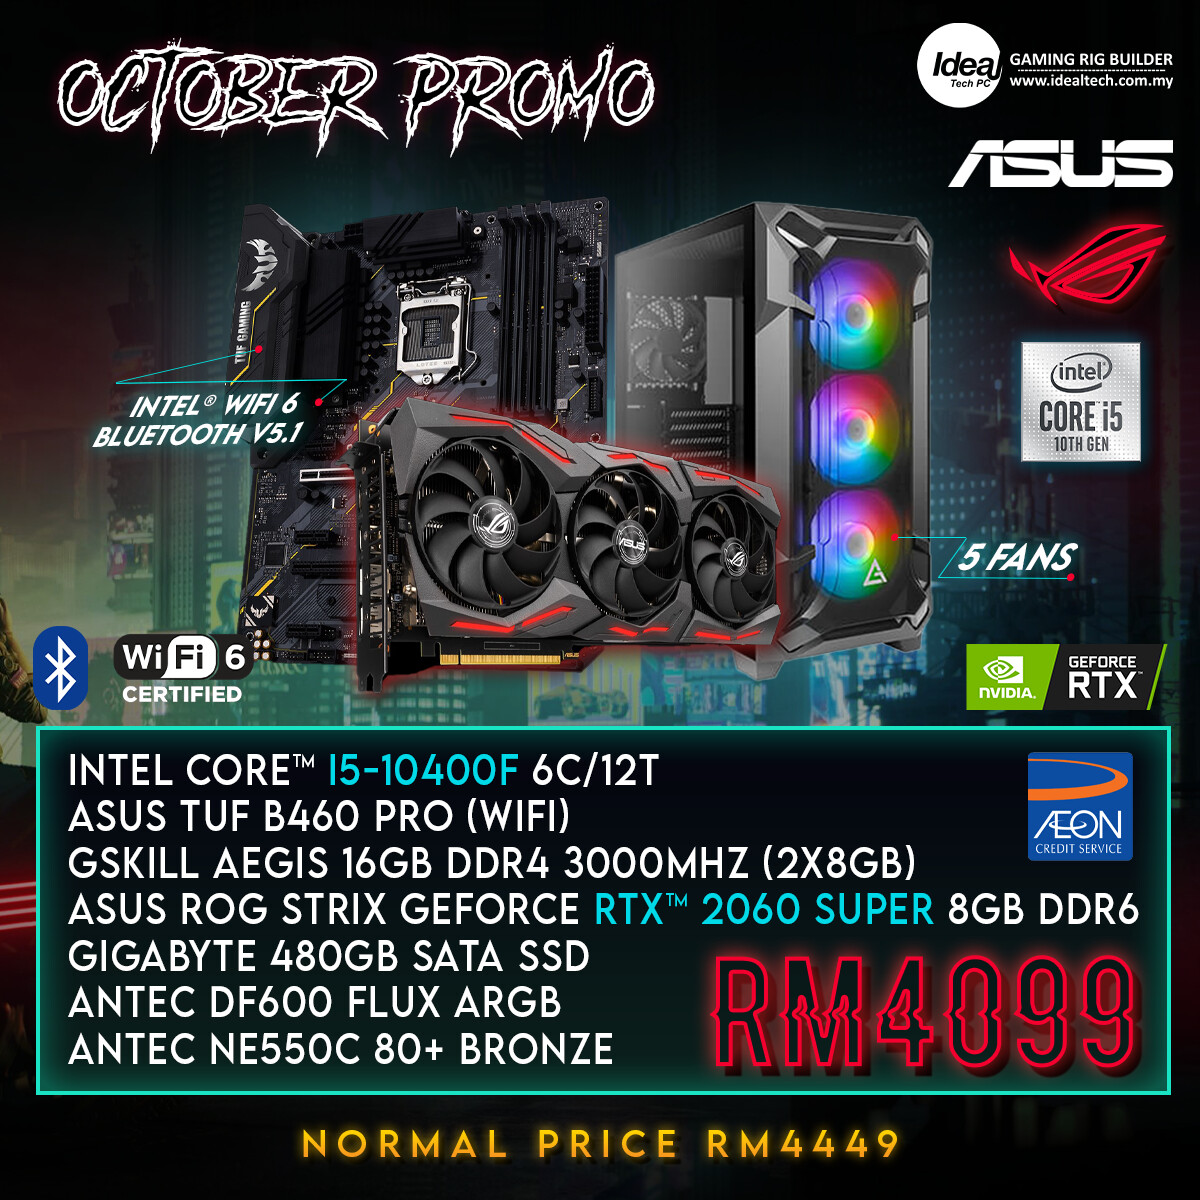 Pc packages